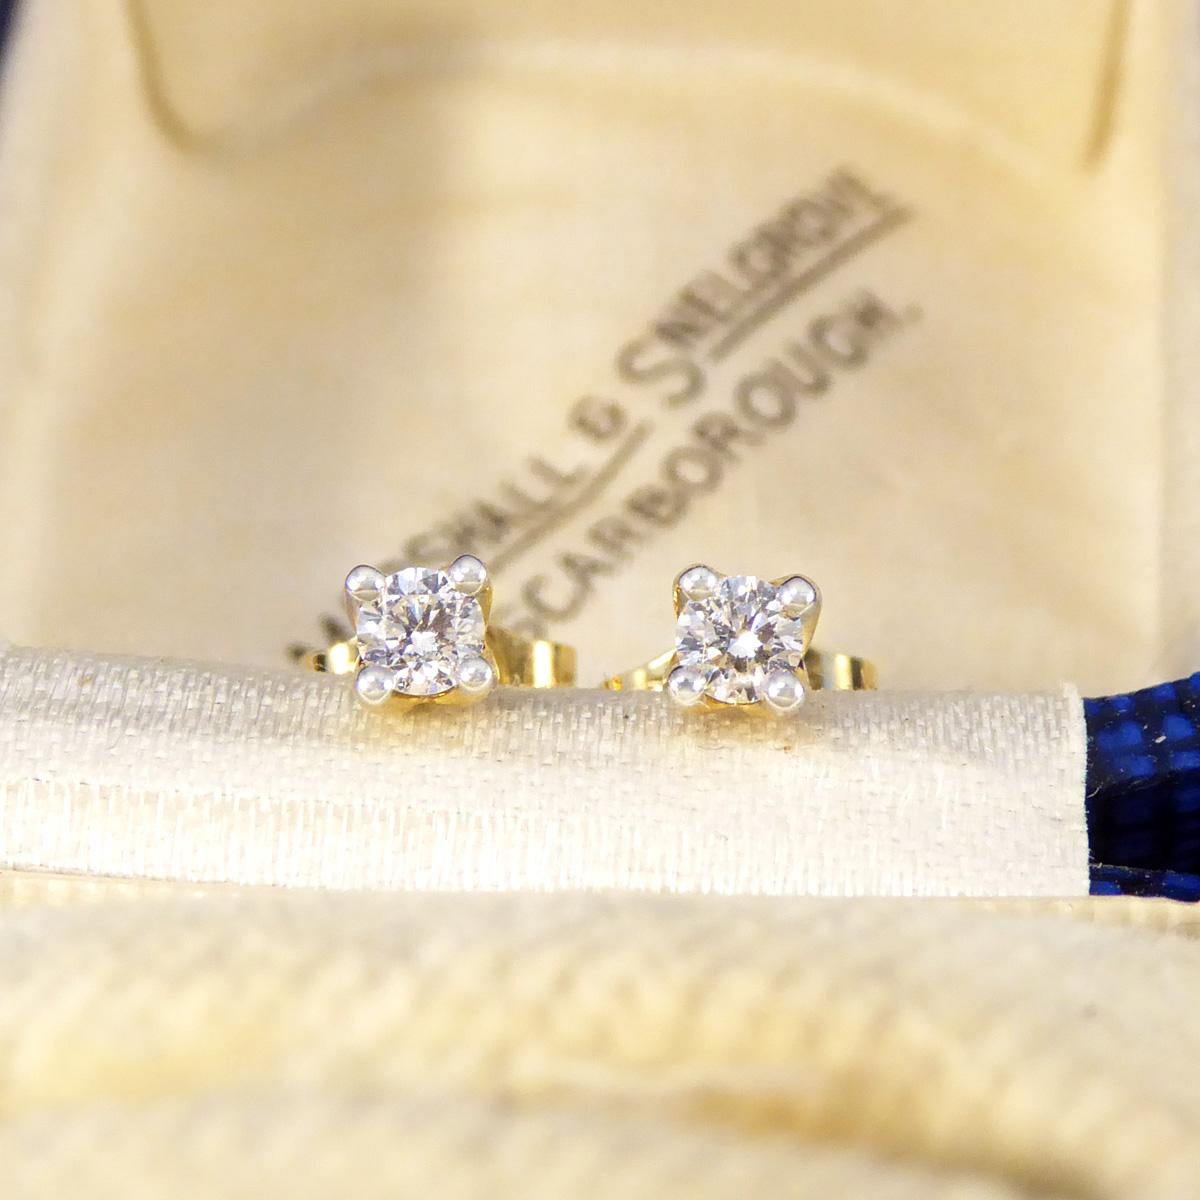 0.15ct Diamond Stud Earrings in 18ct Yellow Gold For Sale 3